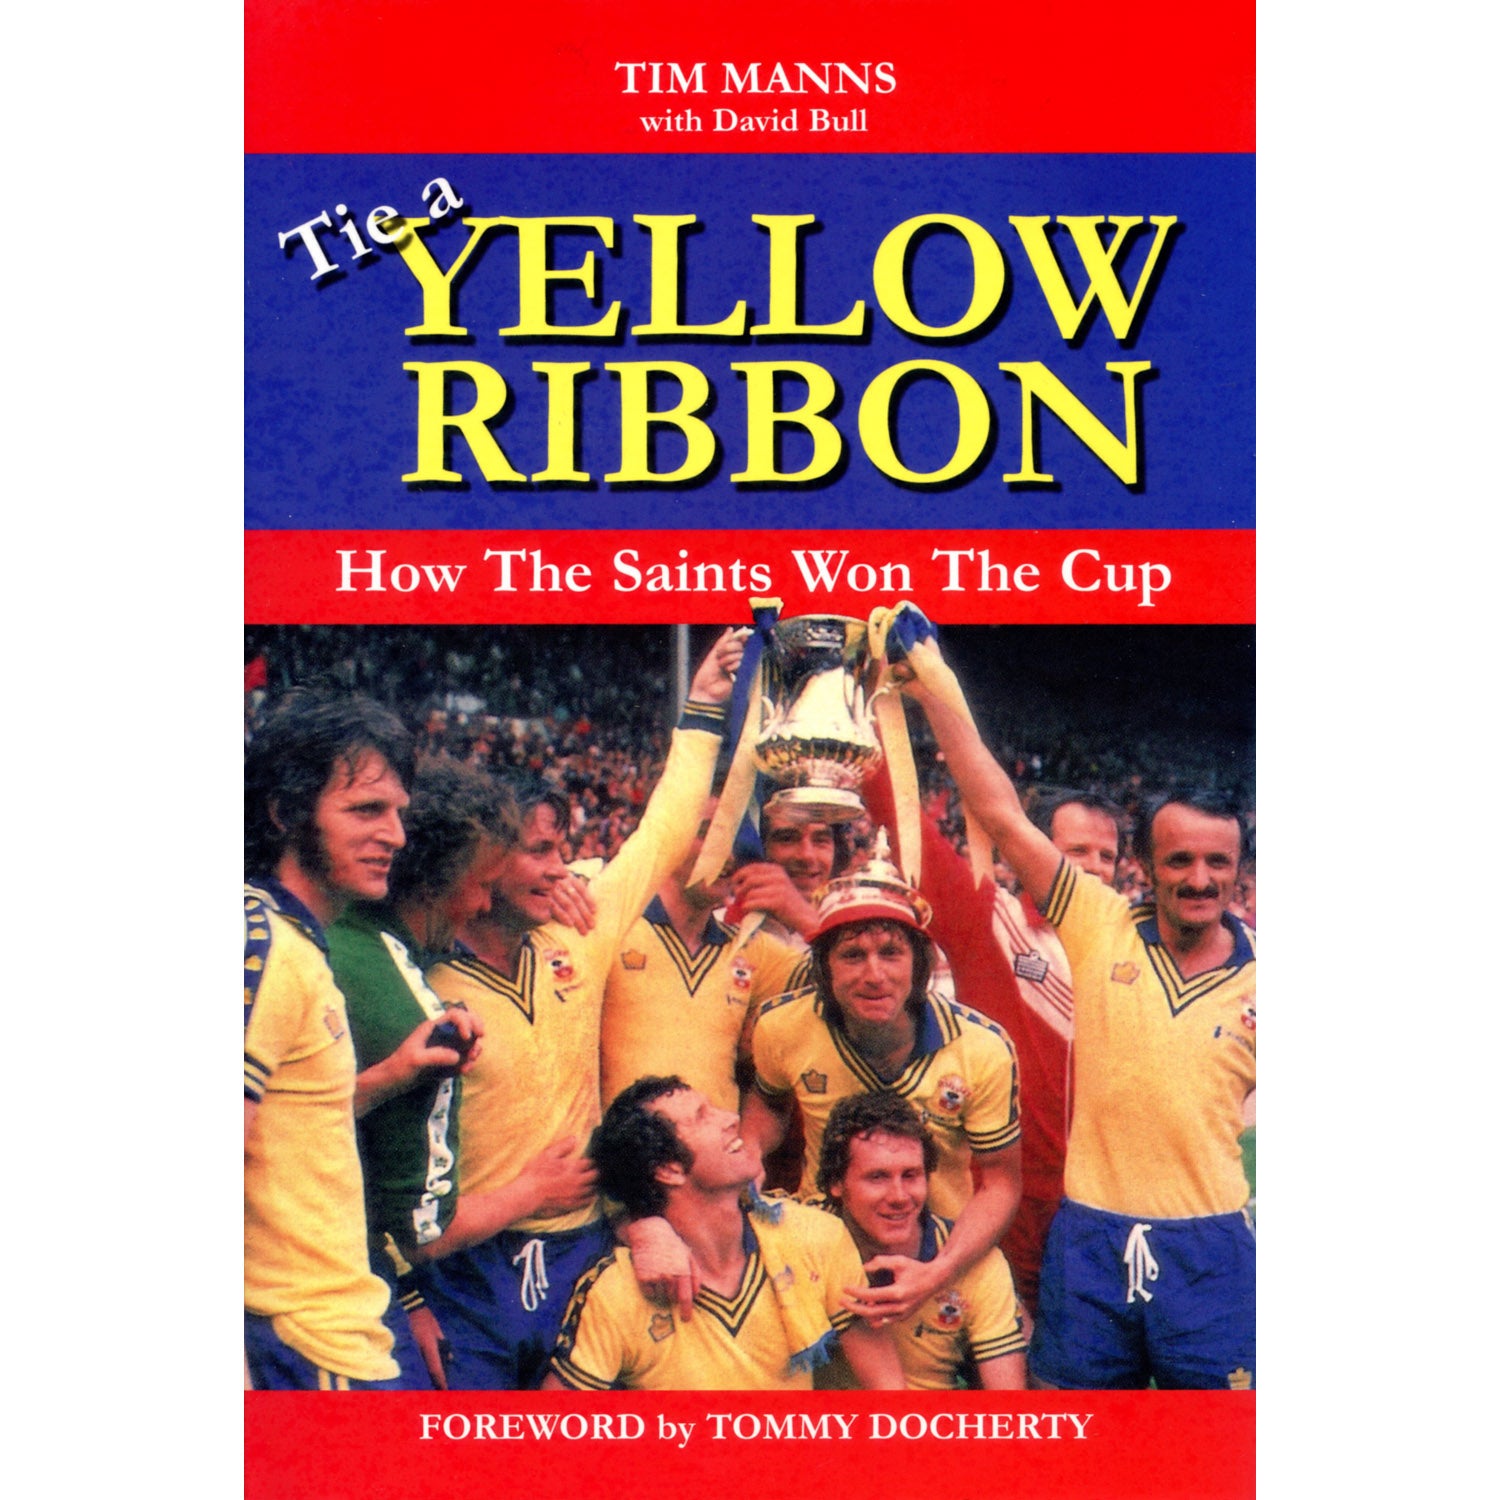 Tie a Yellow Ribbon – How The Saints Won The Cup